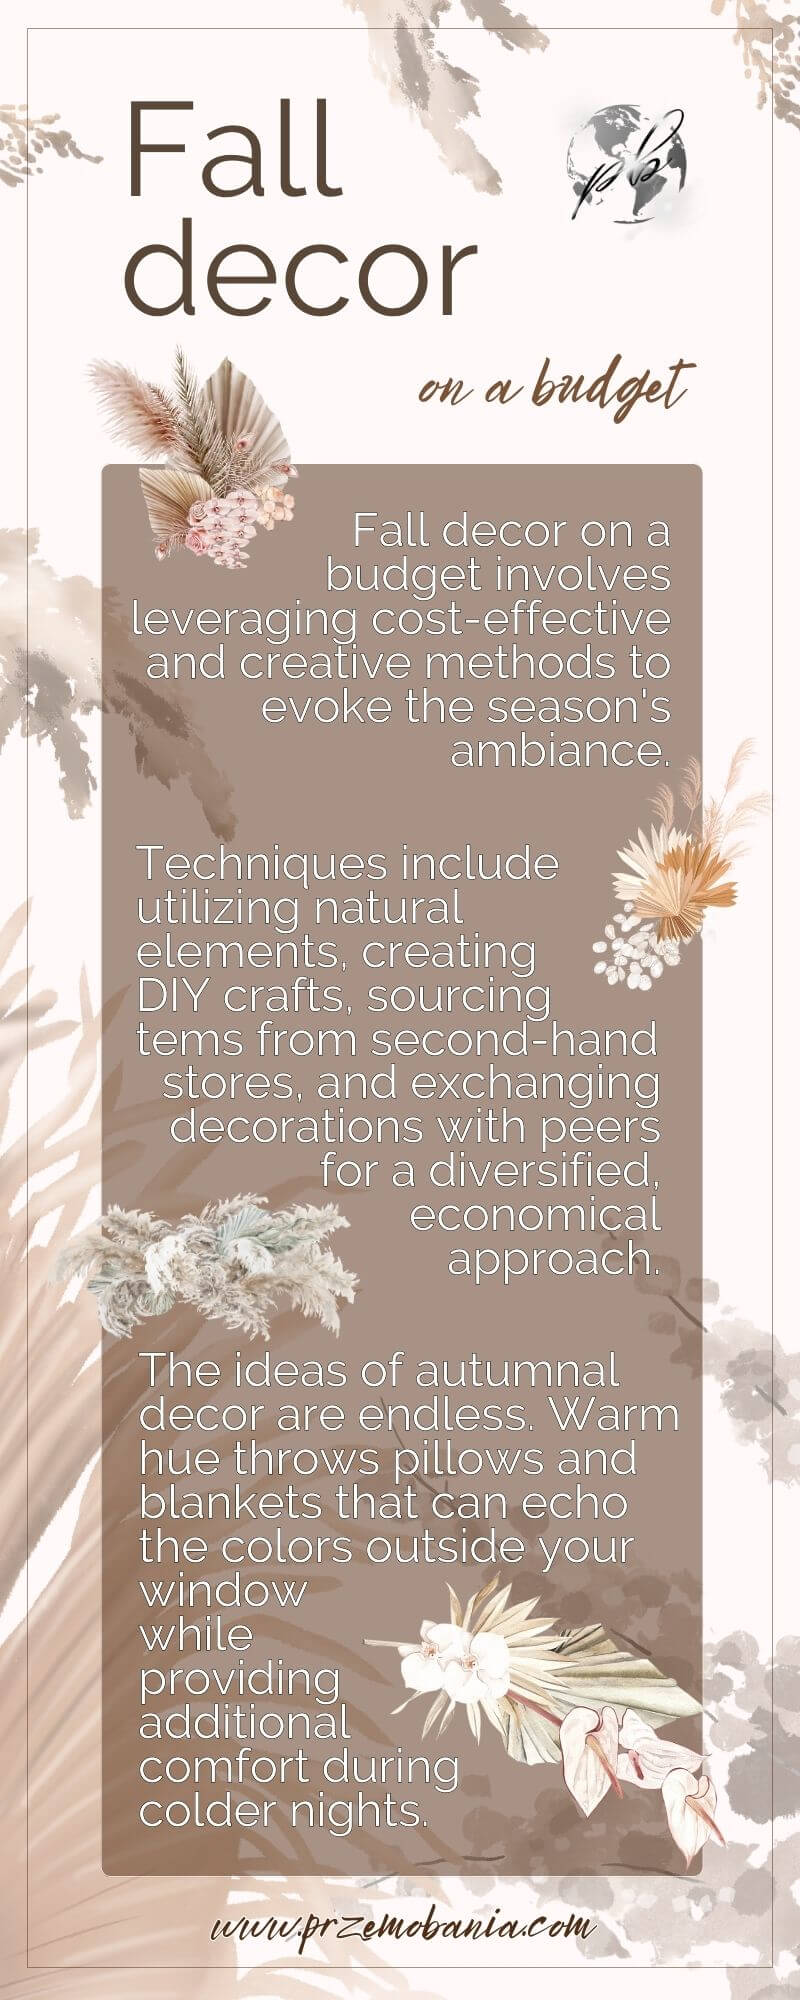 Fall decor on a budget infographic